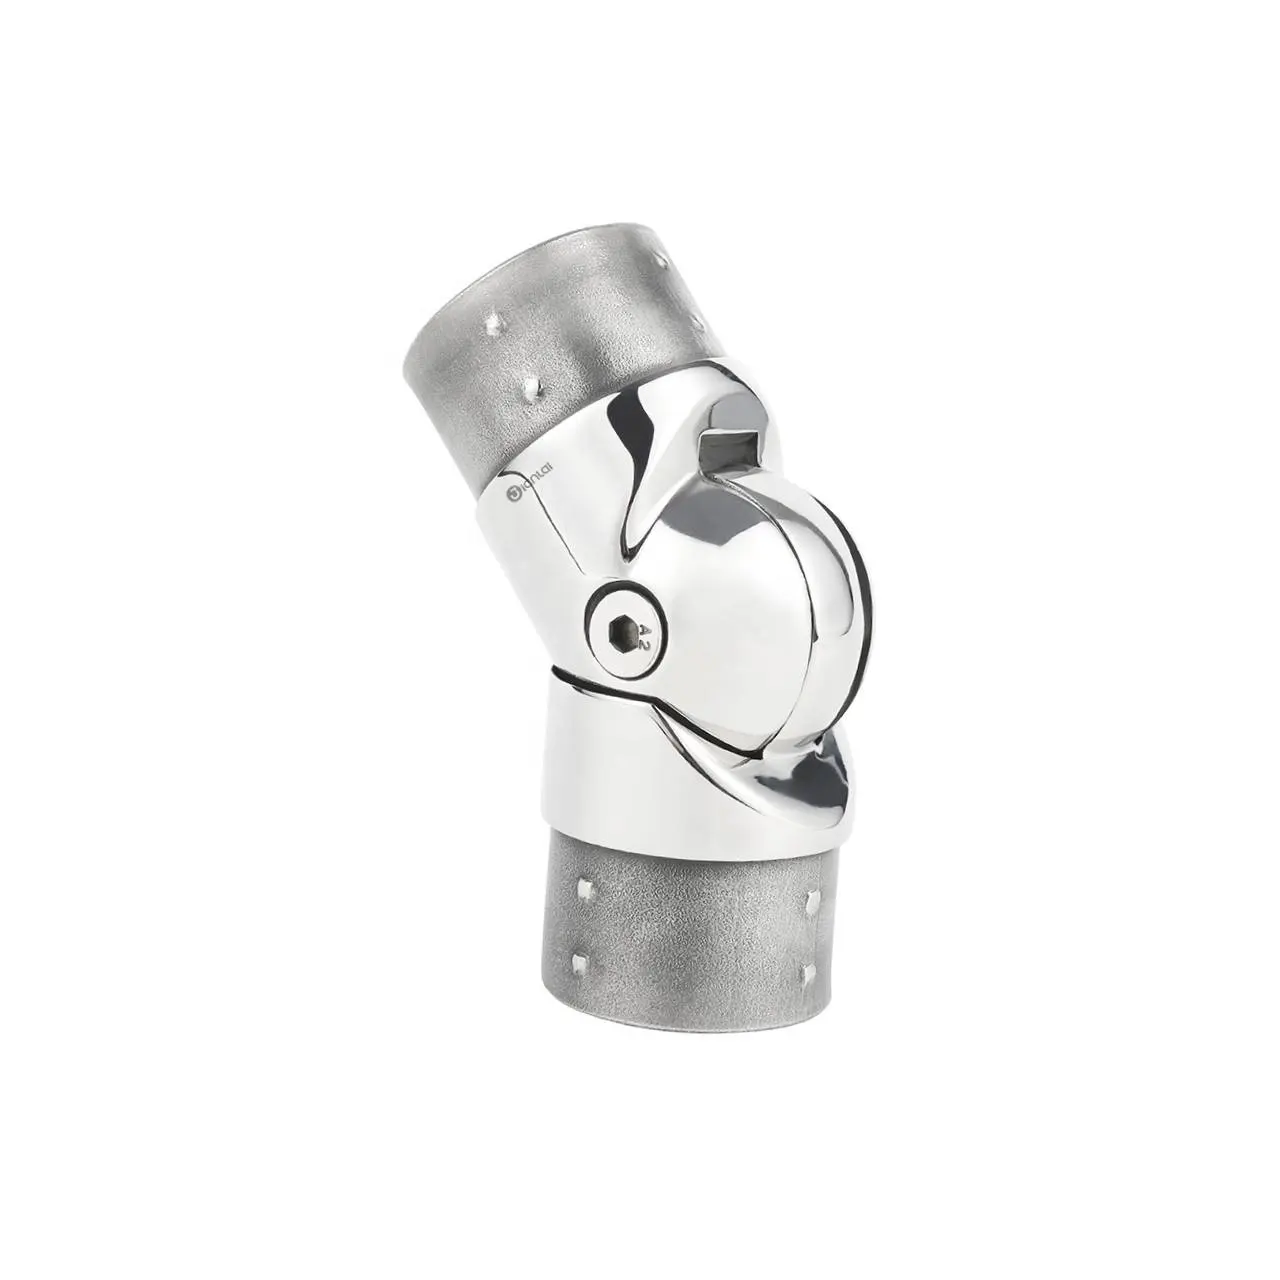 Stainless Steel 304 Handrail Railing Pipe Fitting Adjustable 90 Degree Elbow for Connector